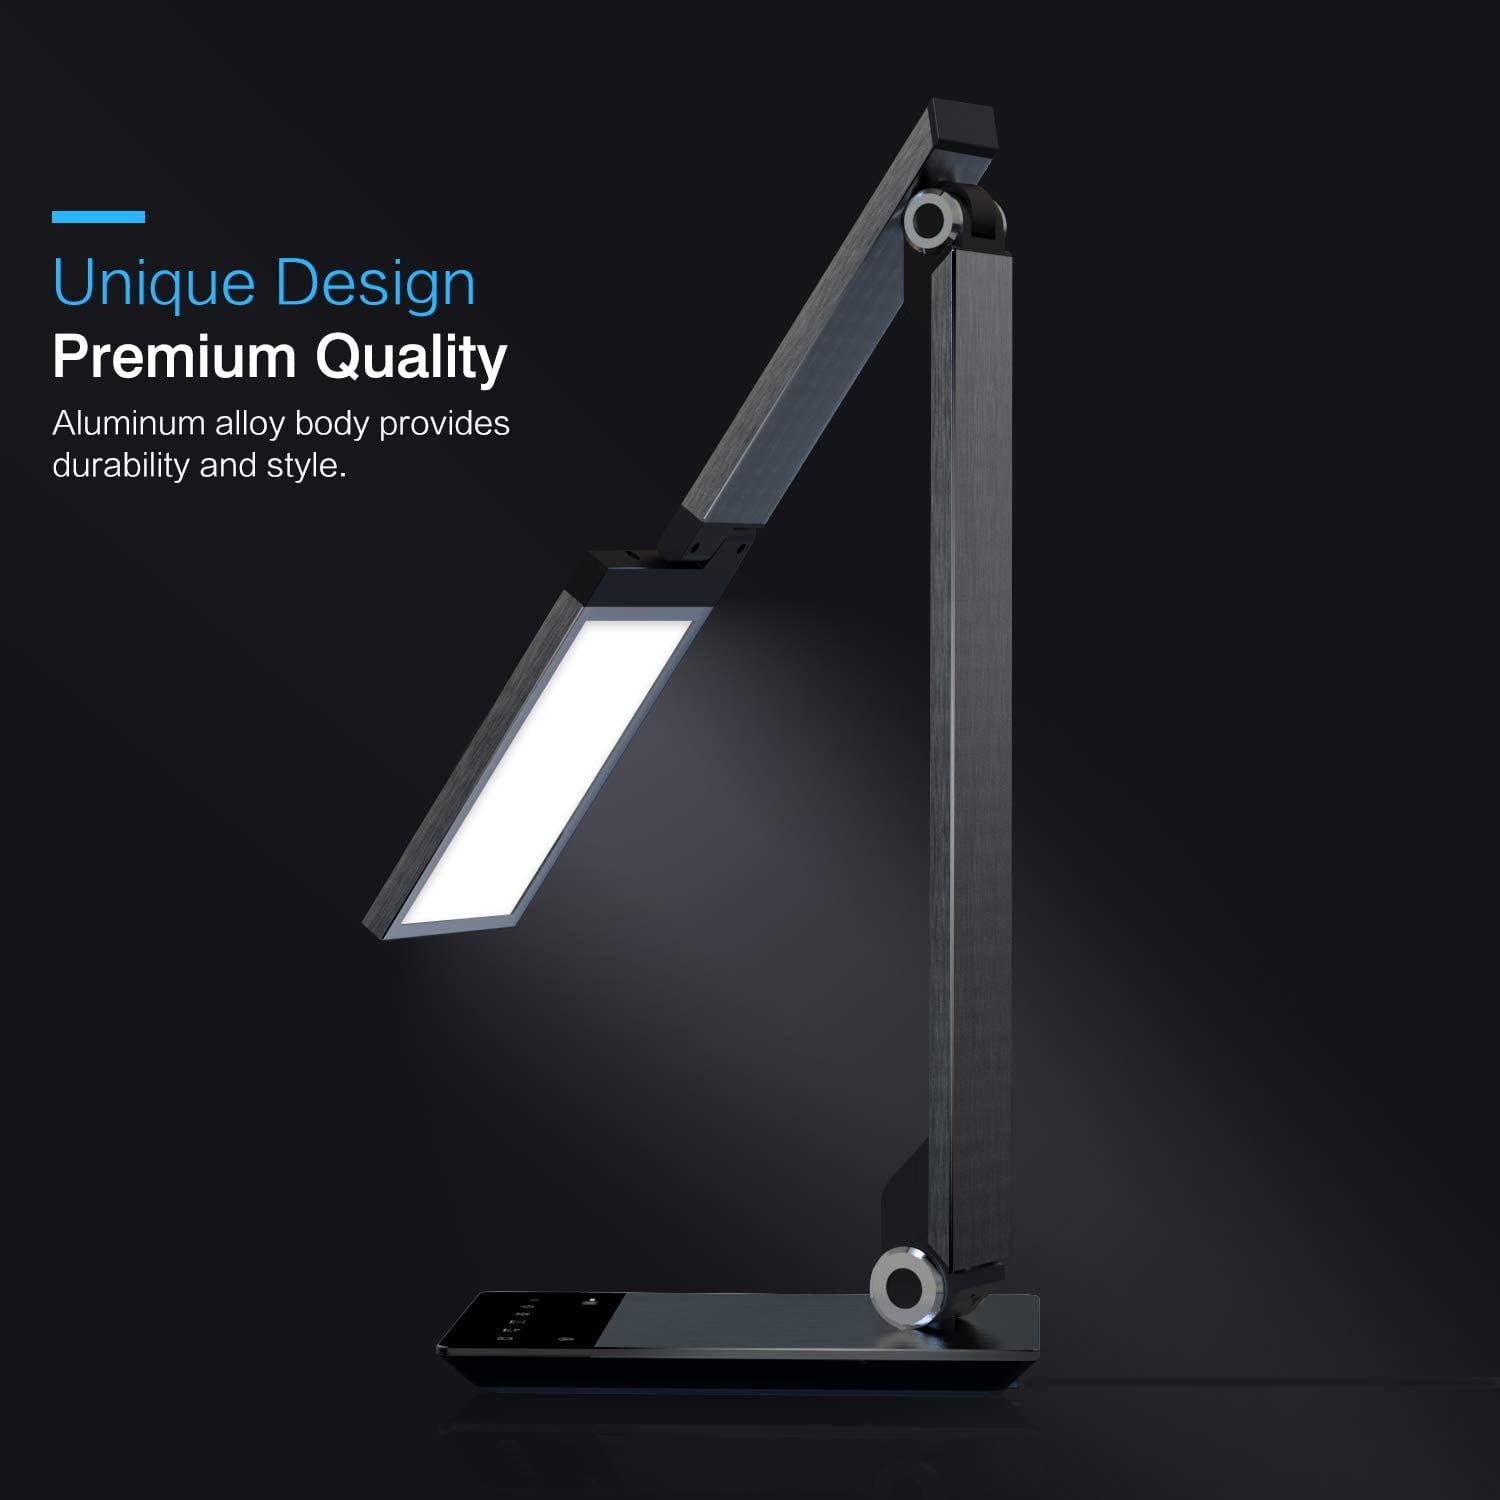 MoKo Smart Touch Stylish Metal Table Lamp Space Gray Rotatable Home Office Lamp with Stepless Brightness/Color Temperature 5V 2.4A USB Charging Port Sleep Mode Memory Function LED Desk Lamp